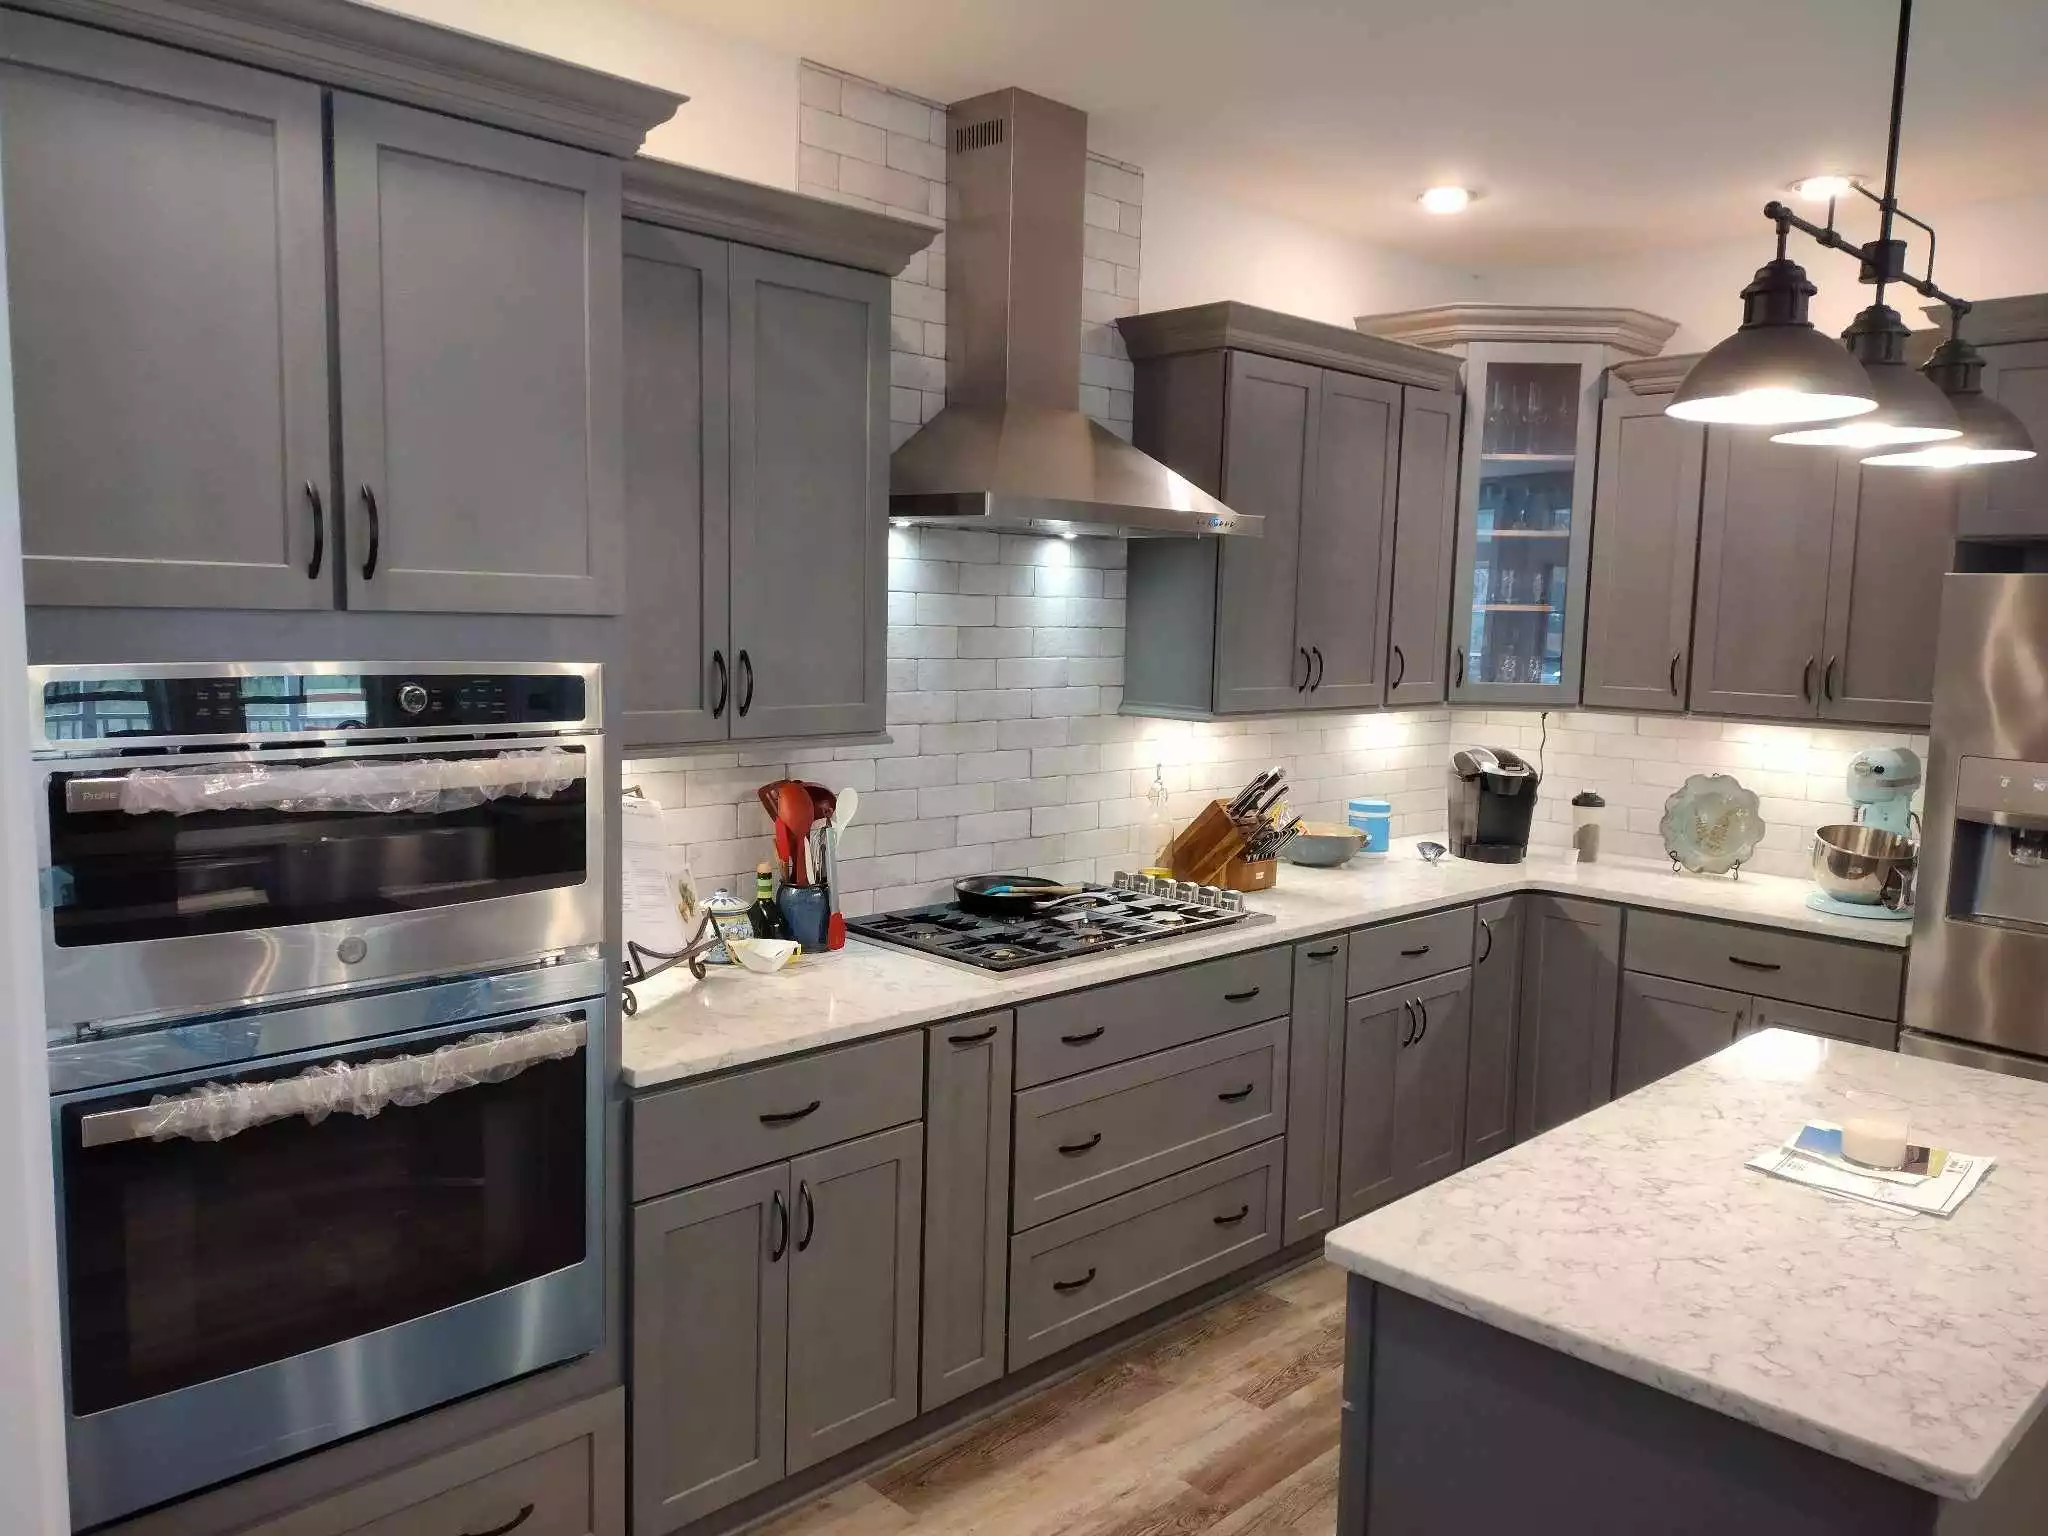 Beautiful custom kitchen remodeling project with smoky blue cabinets and custom light fixtures